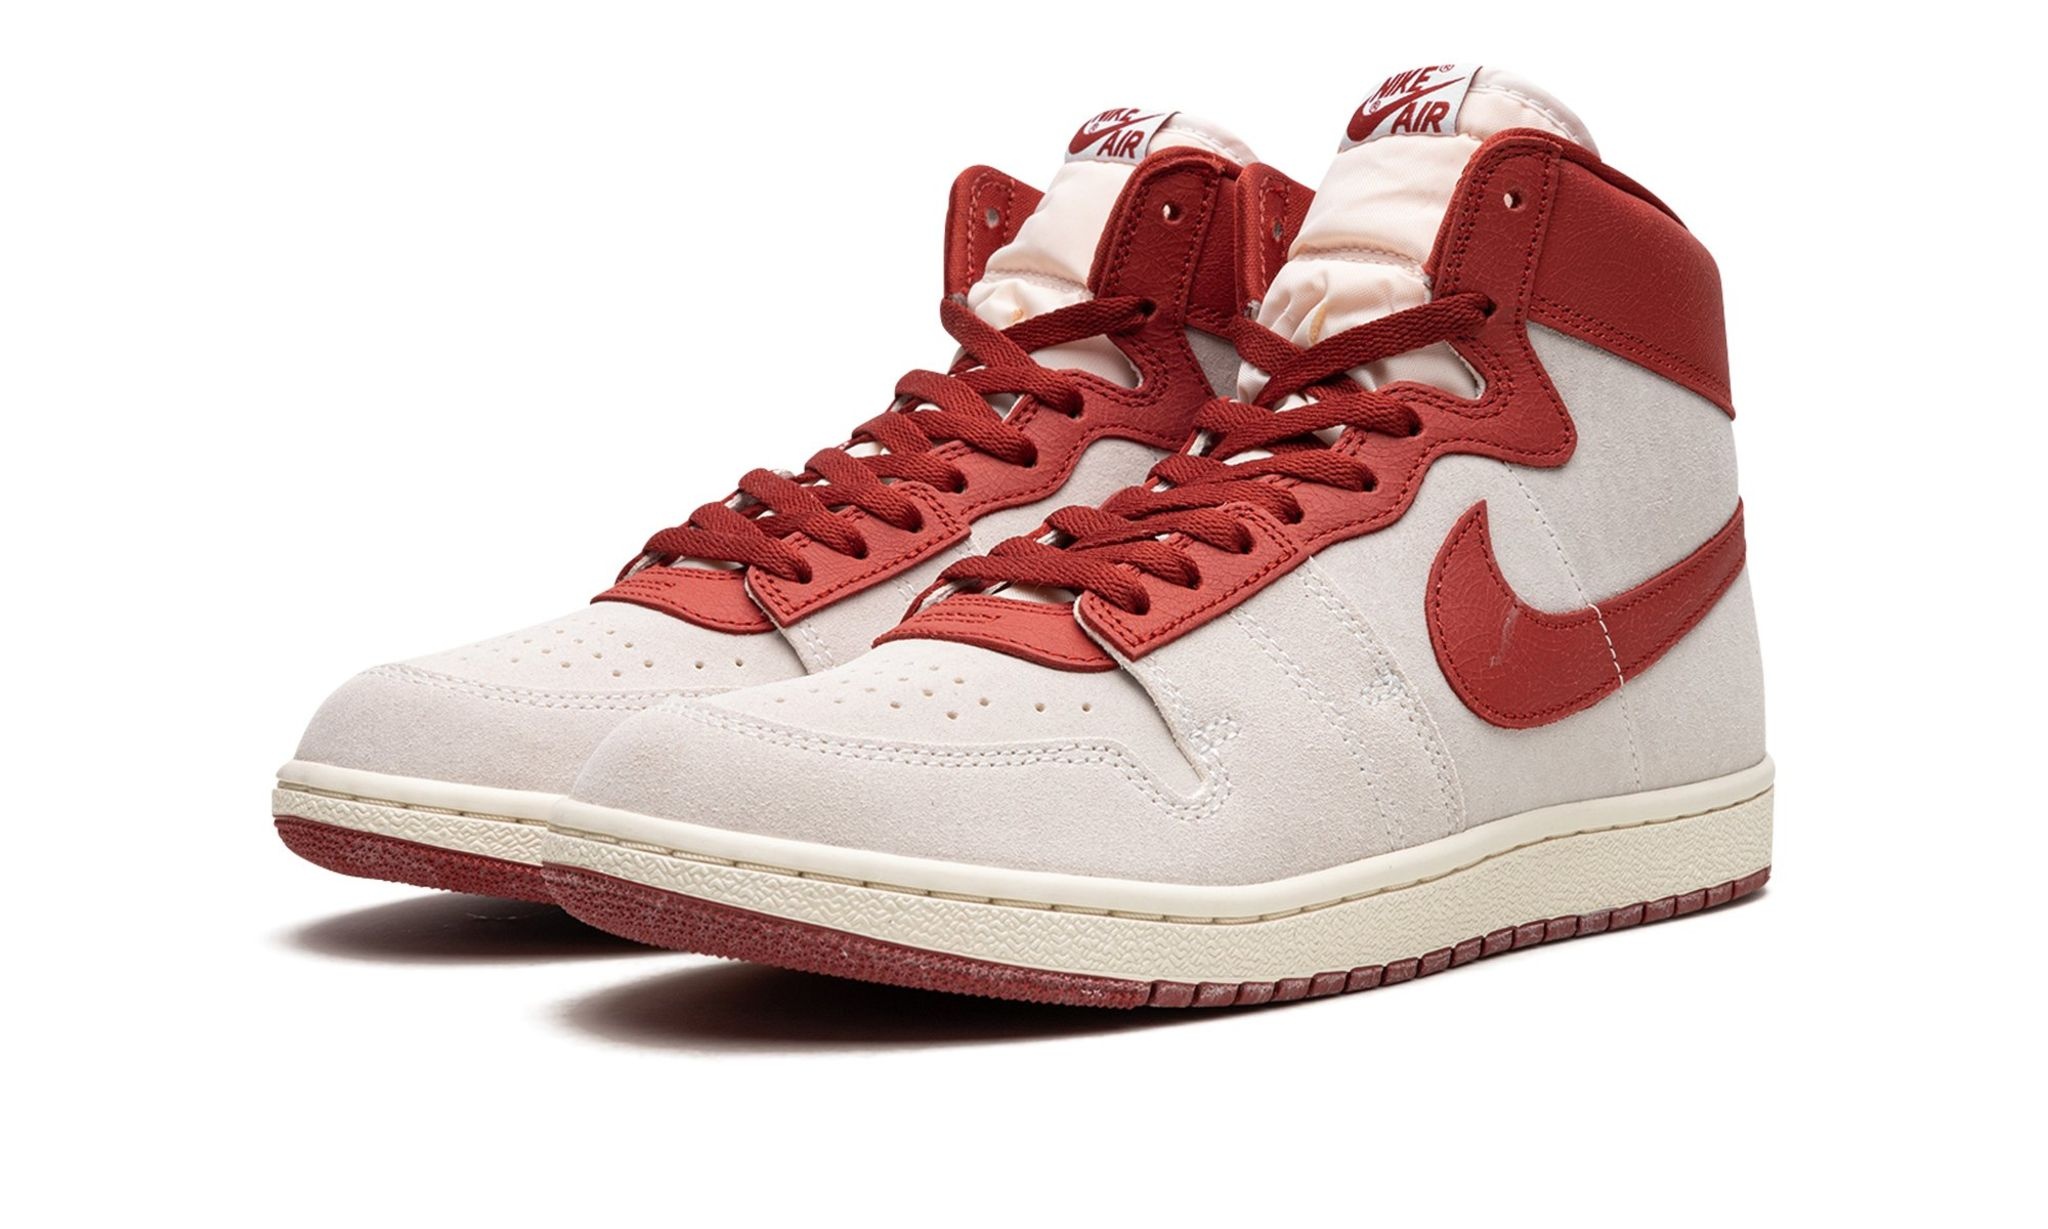 Nike Air Ship "Every Game - Dune Red" - 2